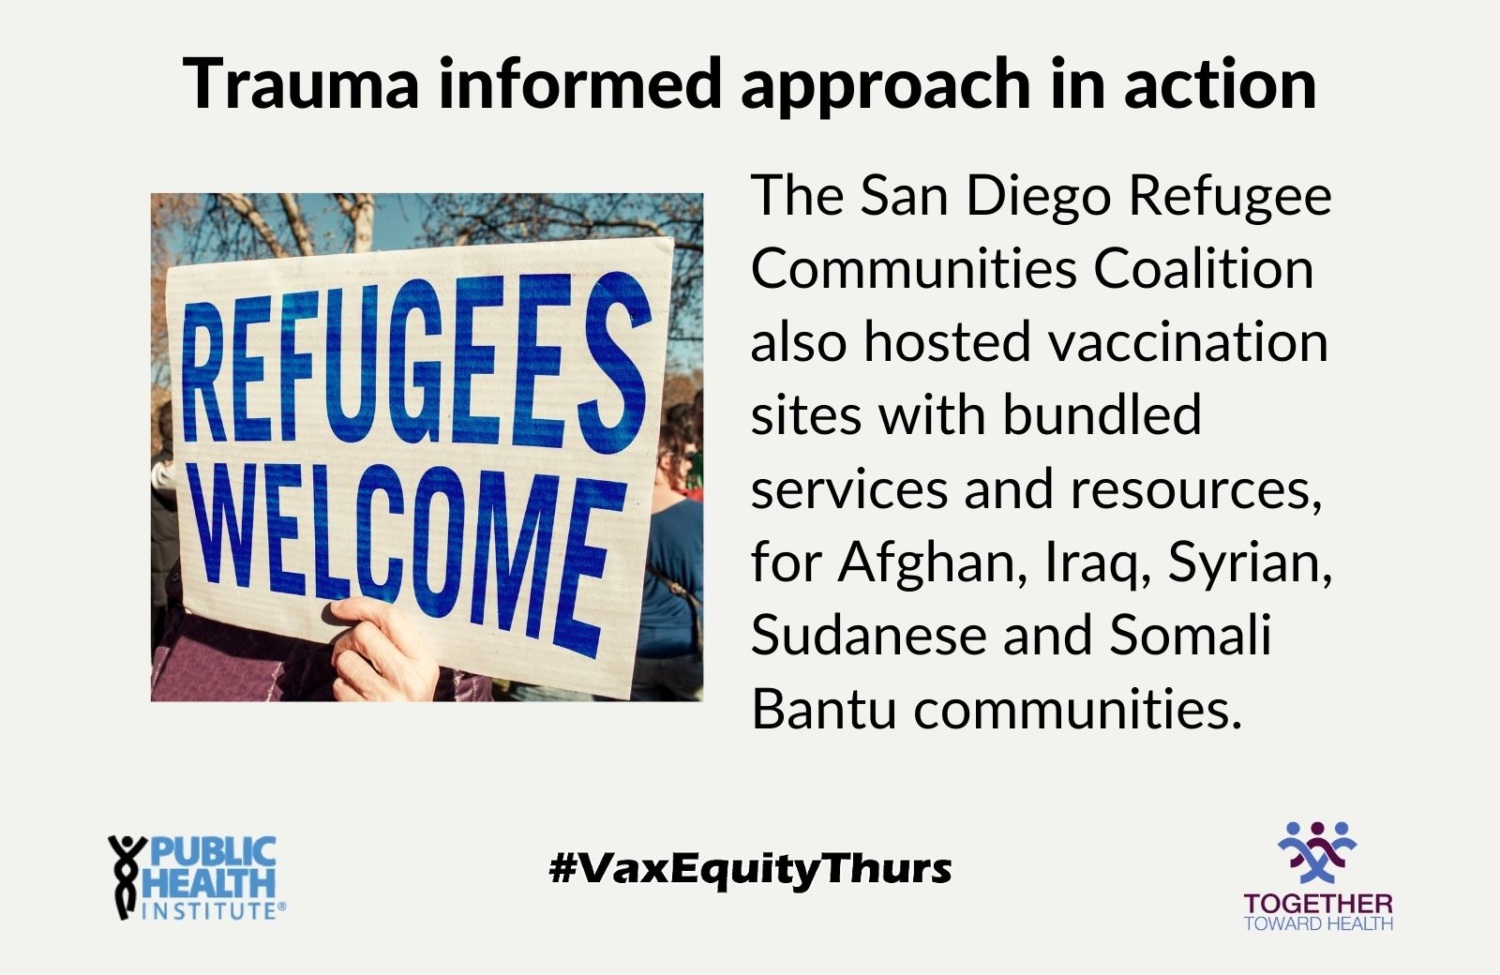 Trauma informed approach in action The San Diego Refugee Communities Coalition also hosted vaccination sites with bundled services and resources, for Afghan, Iraq, Syrian, Sudanese and Somali Bantu communities.